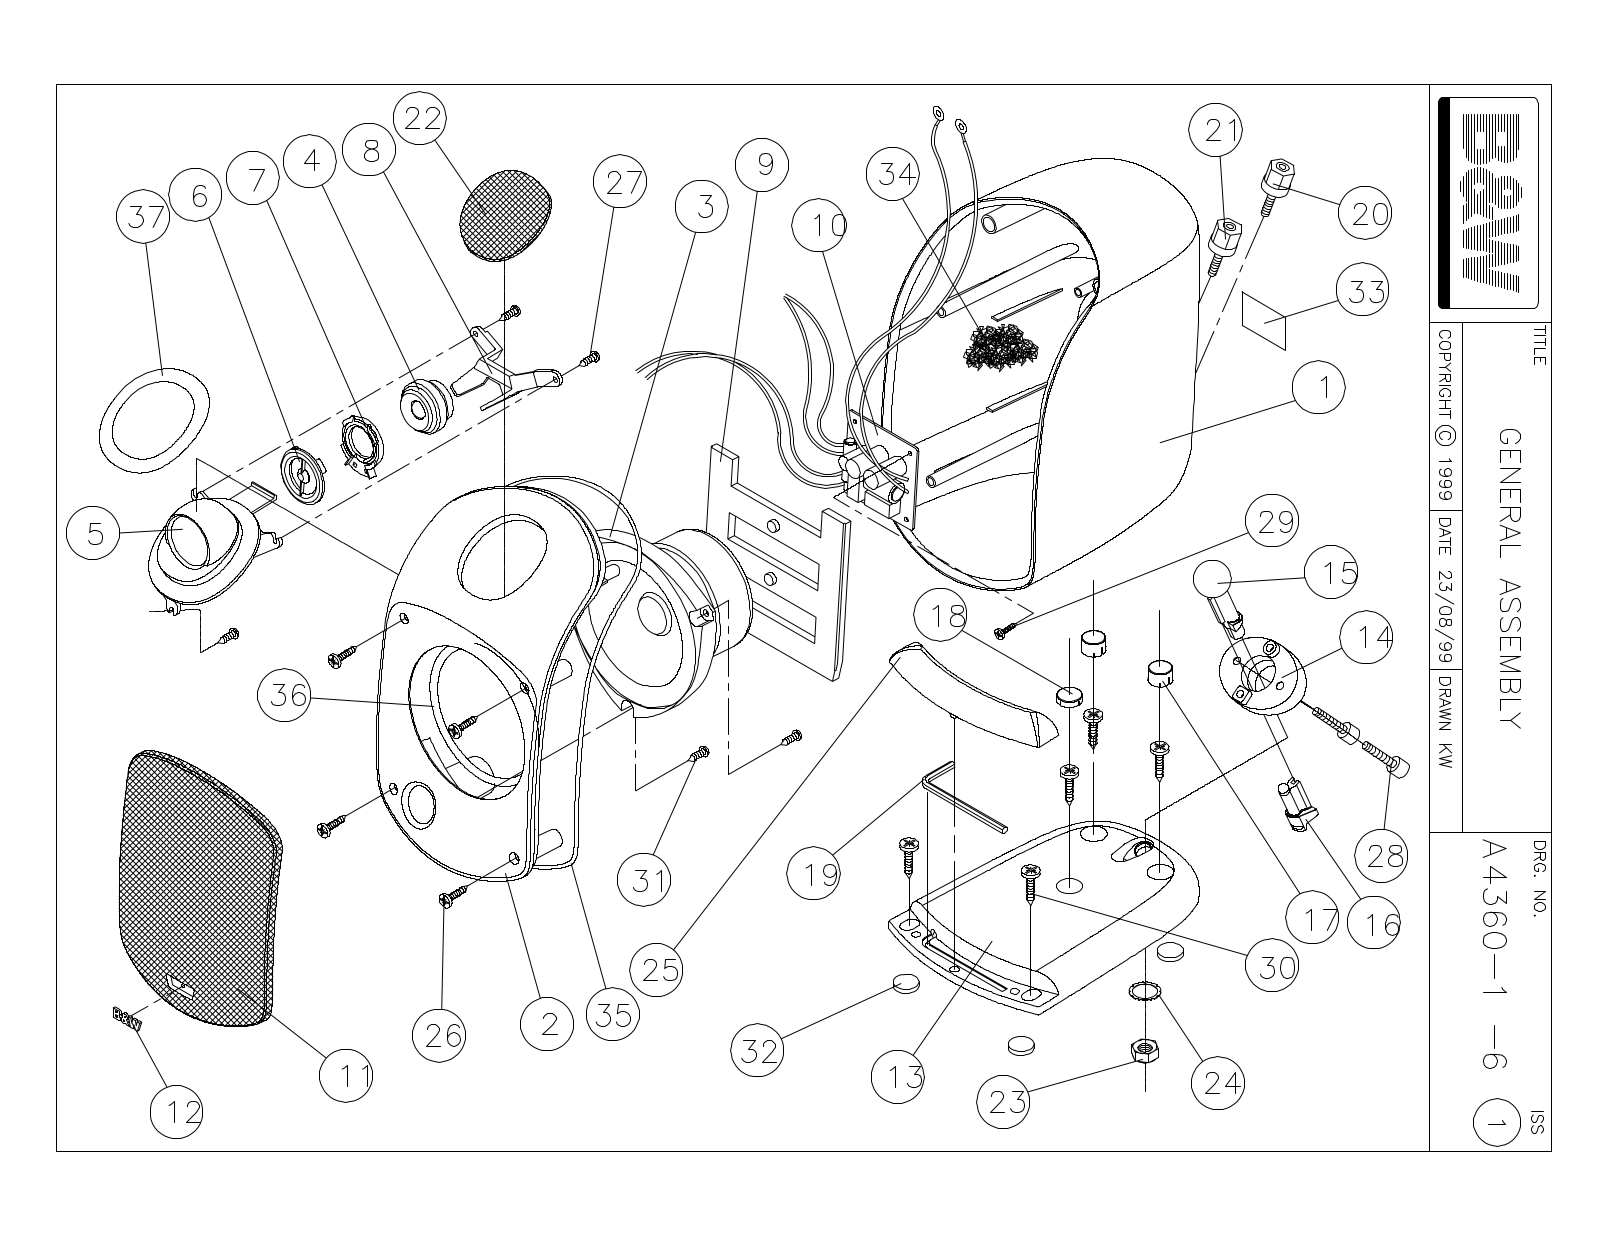 Bowers and Wilkins LM-1 Service manual